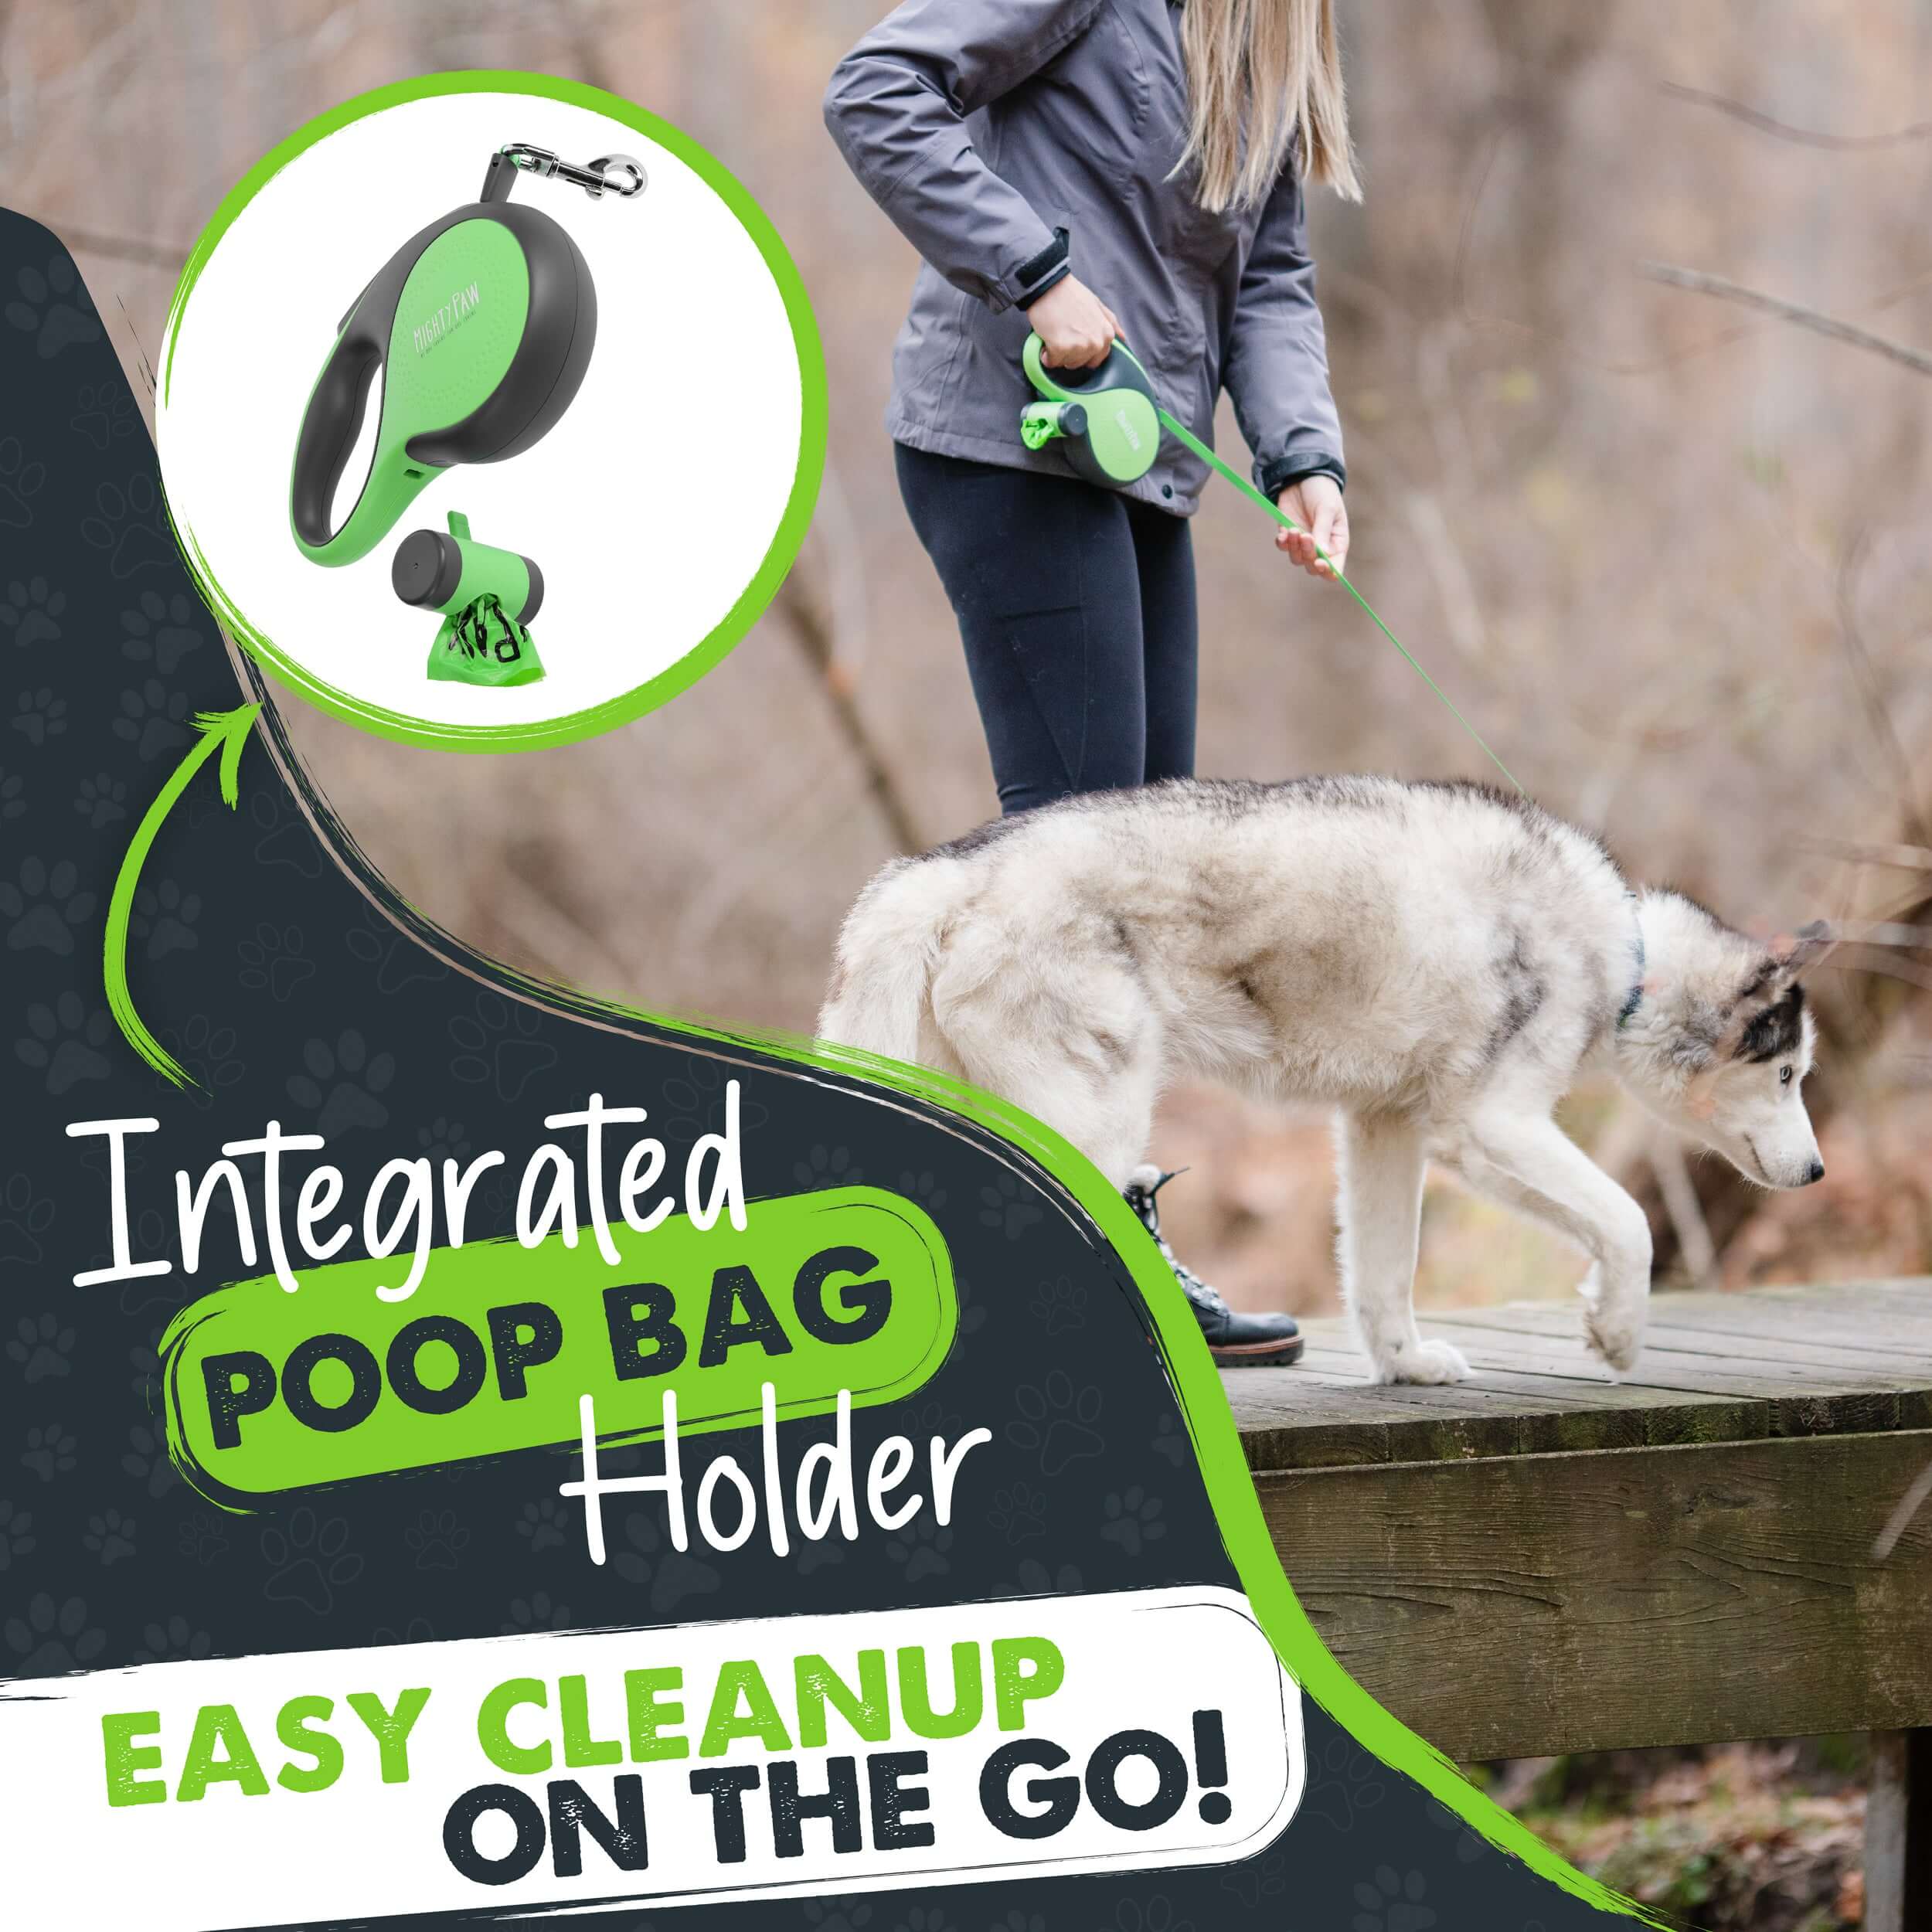 Mighty Paw Retractable Dog Leash 3.0 with Poop Bag Holder